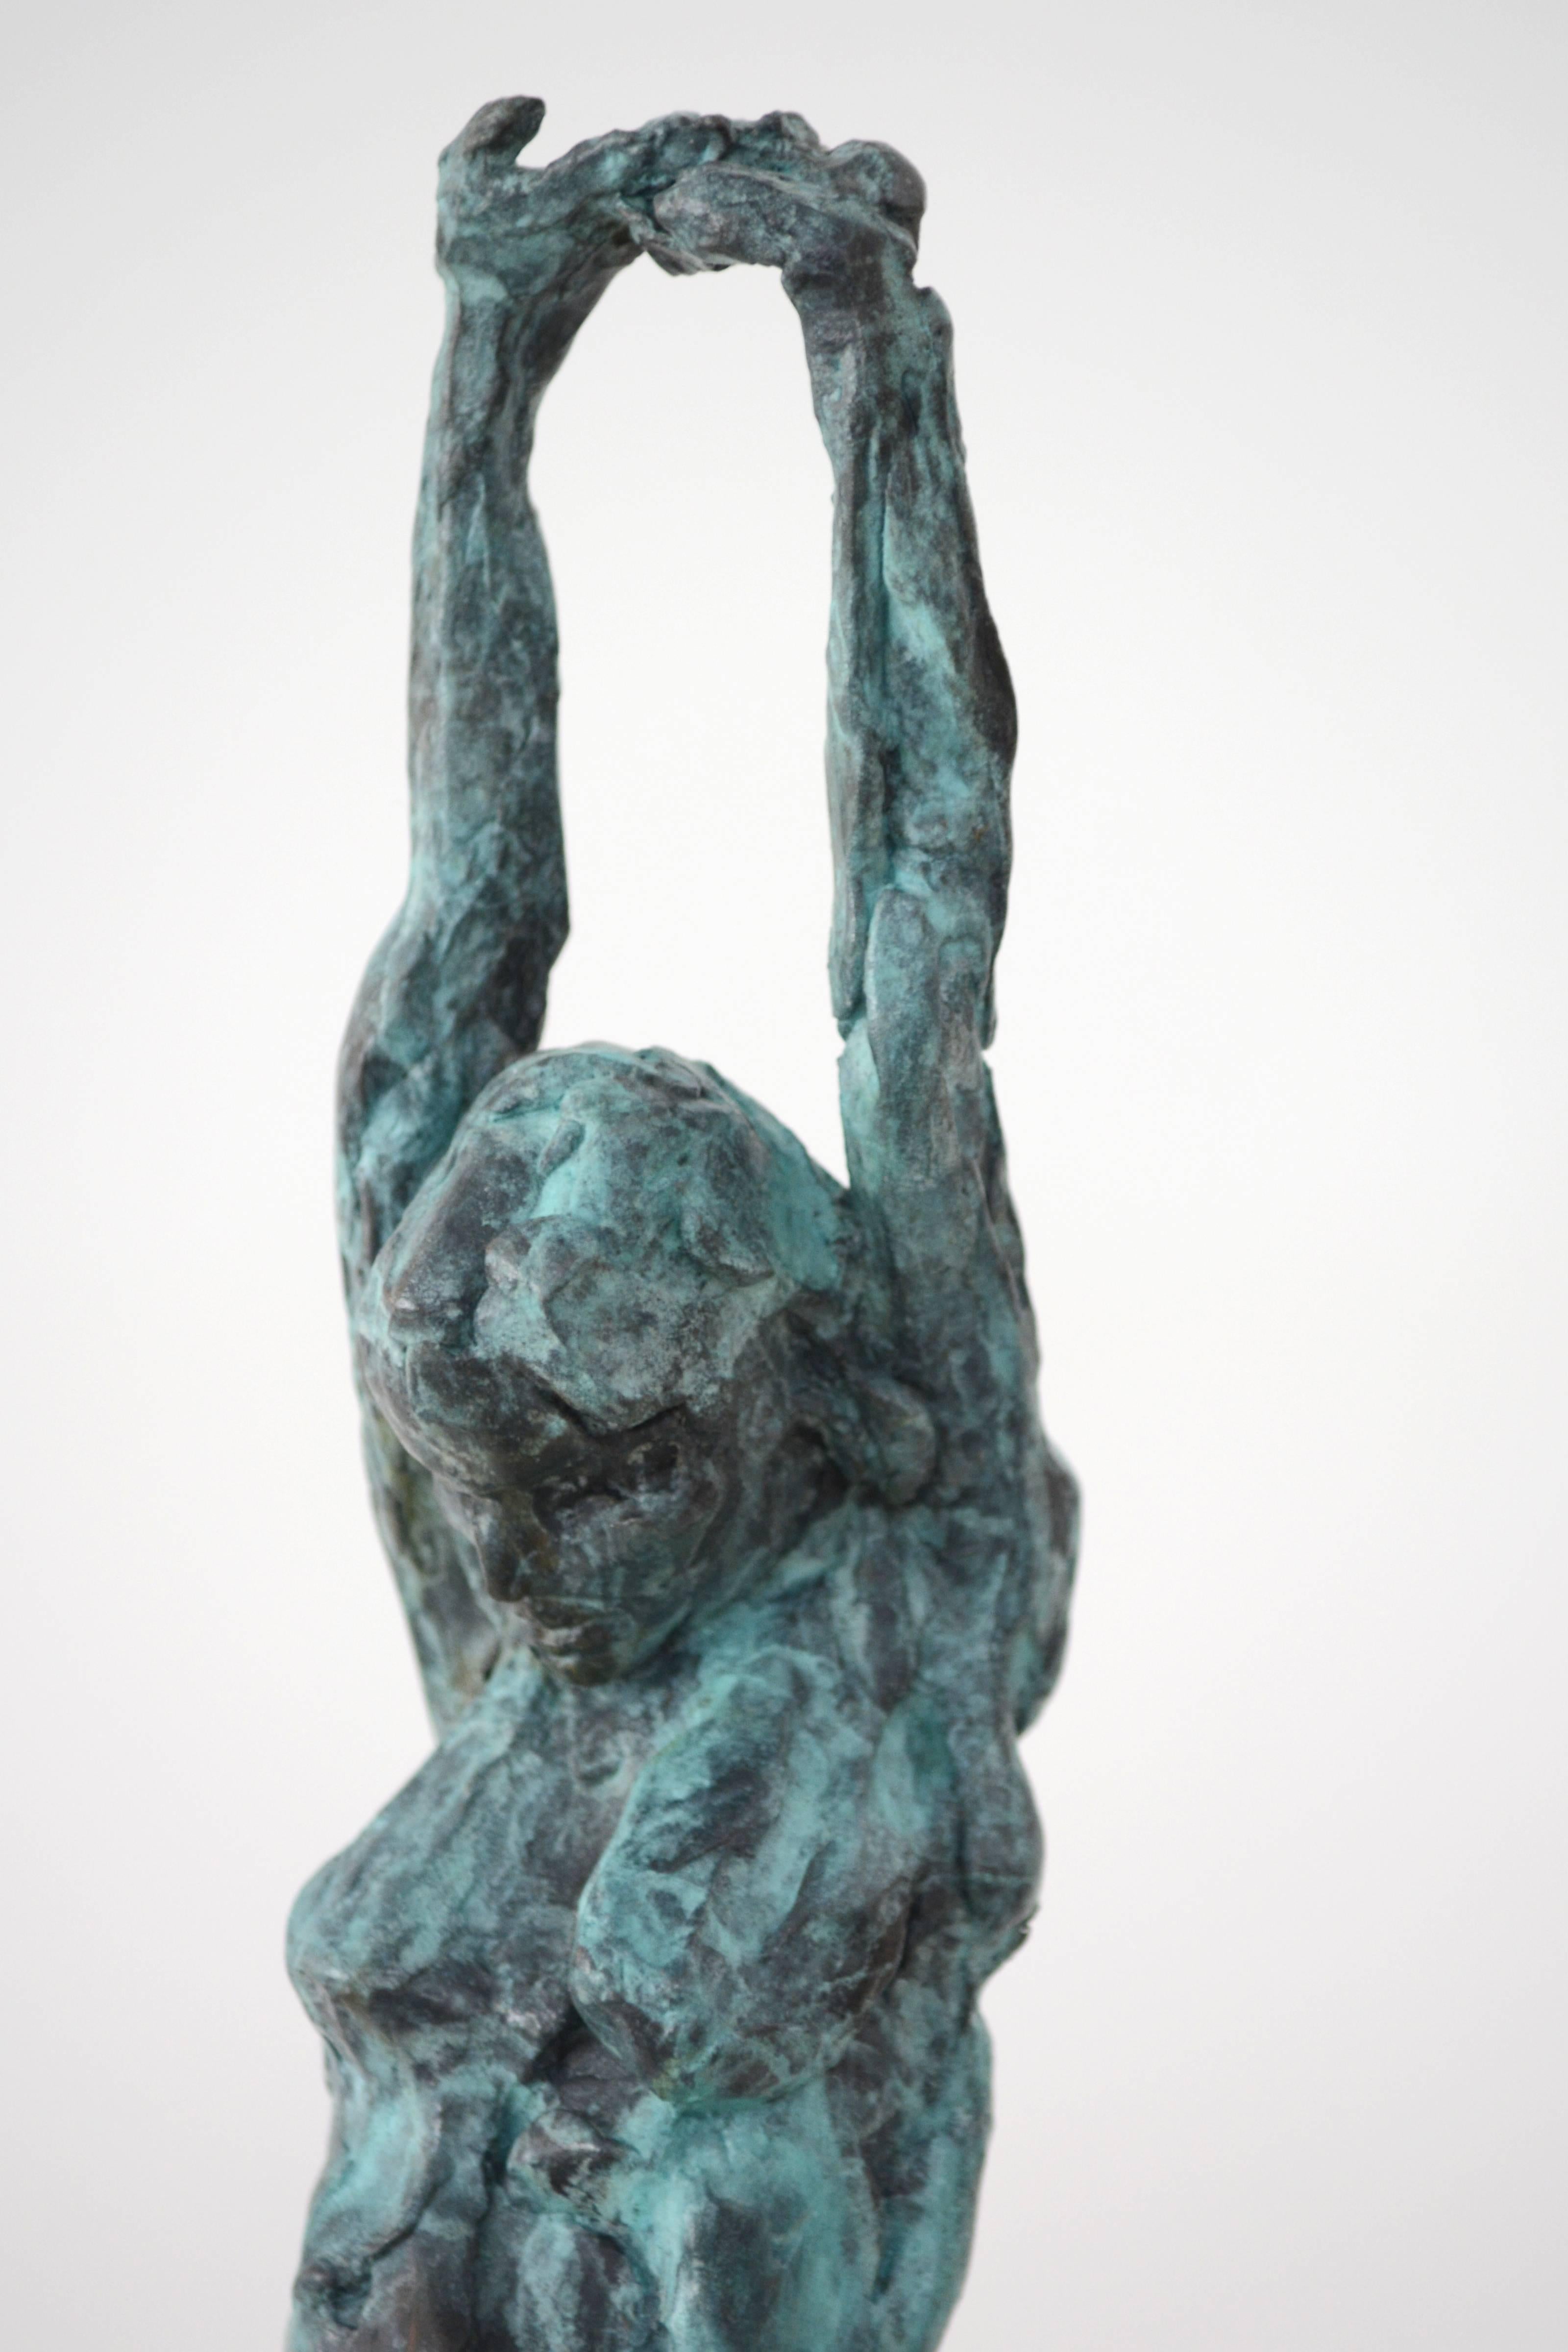 This female figure has her arms fully extended over her head as a dancer would stretch before performing. The light blue and green patina highlights this gesture and slowly blends downward into a mossy green and black patina by her feet. 

A